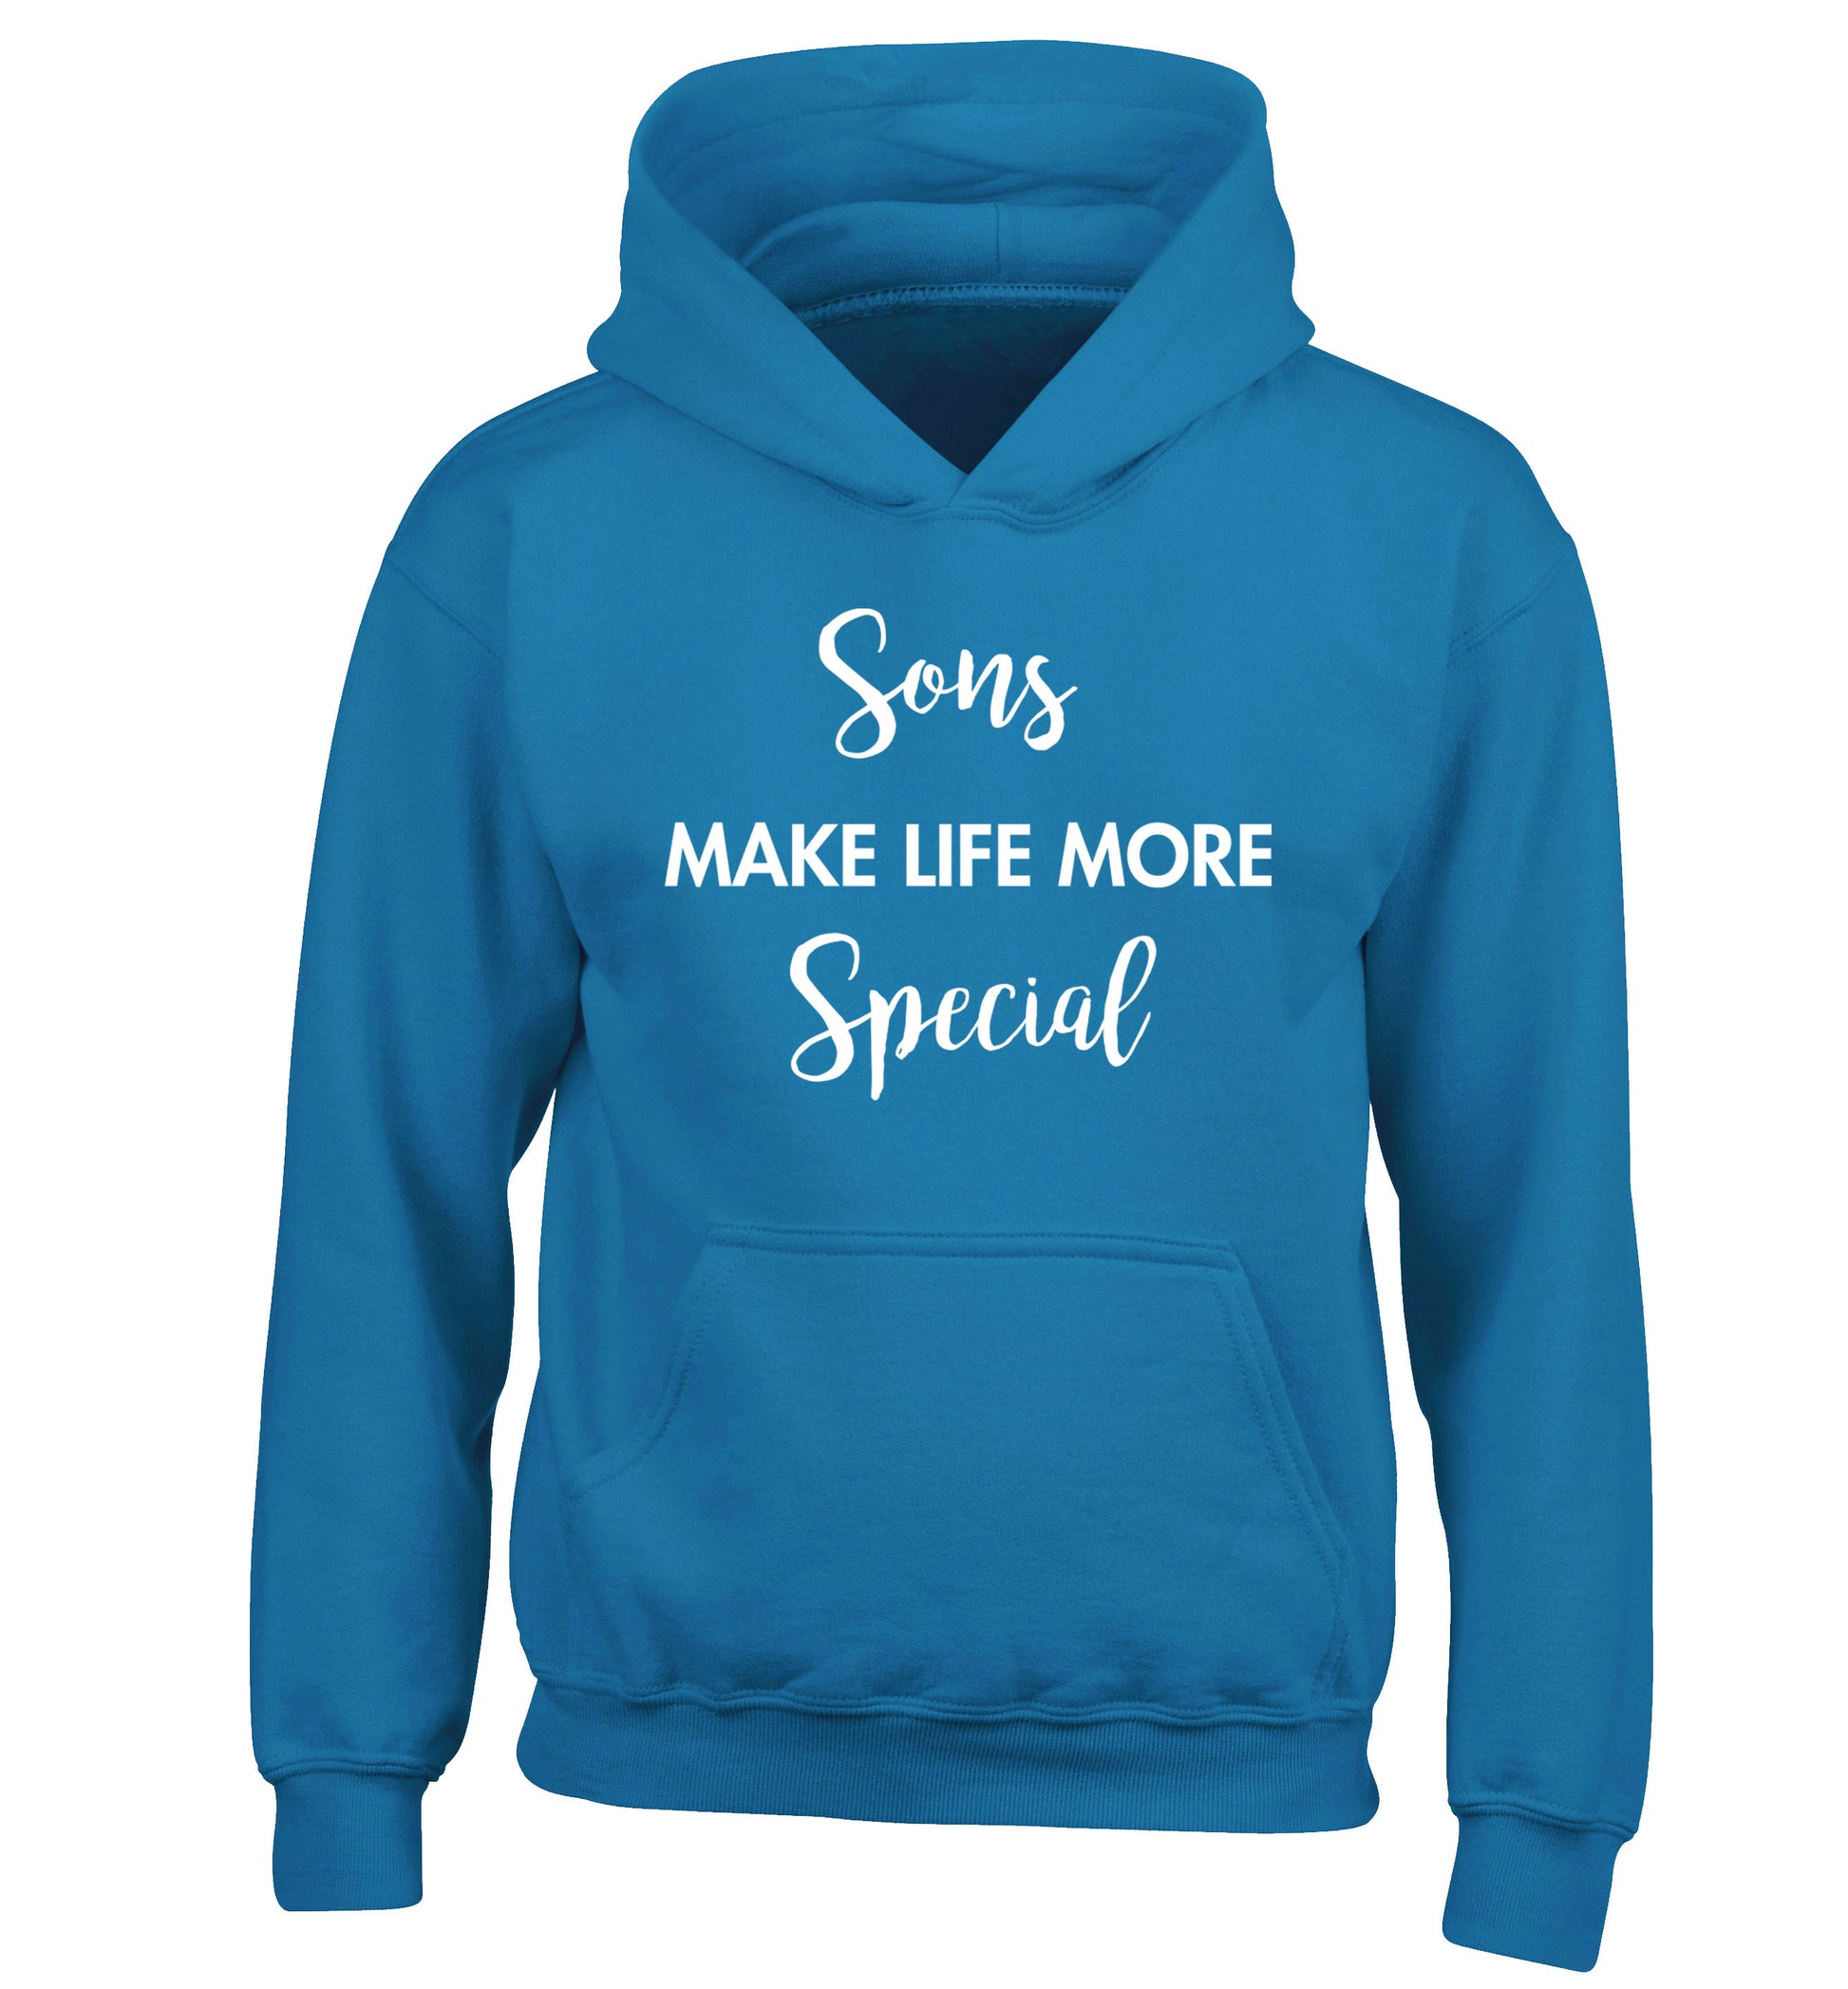 Sons make life more special children's blue hoodie 12-14 Years